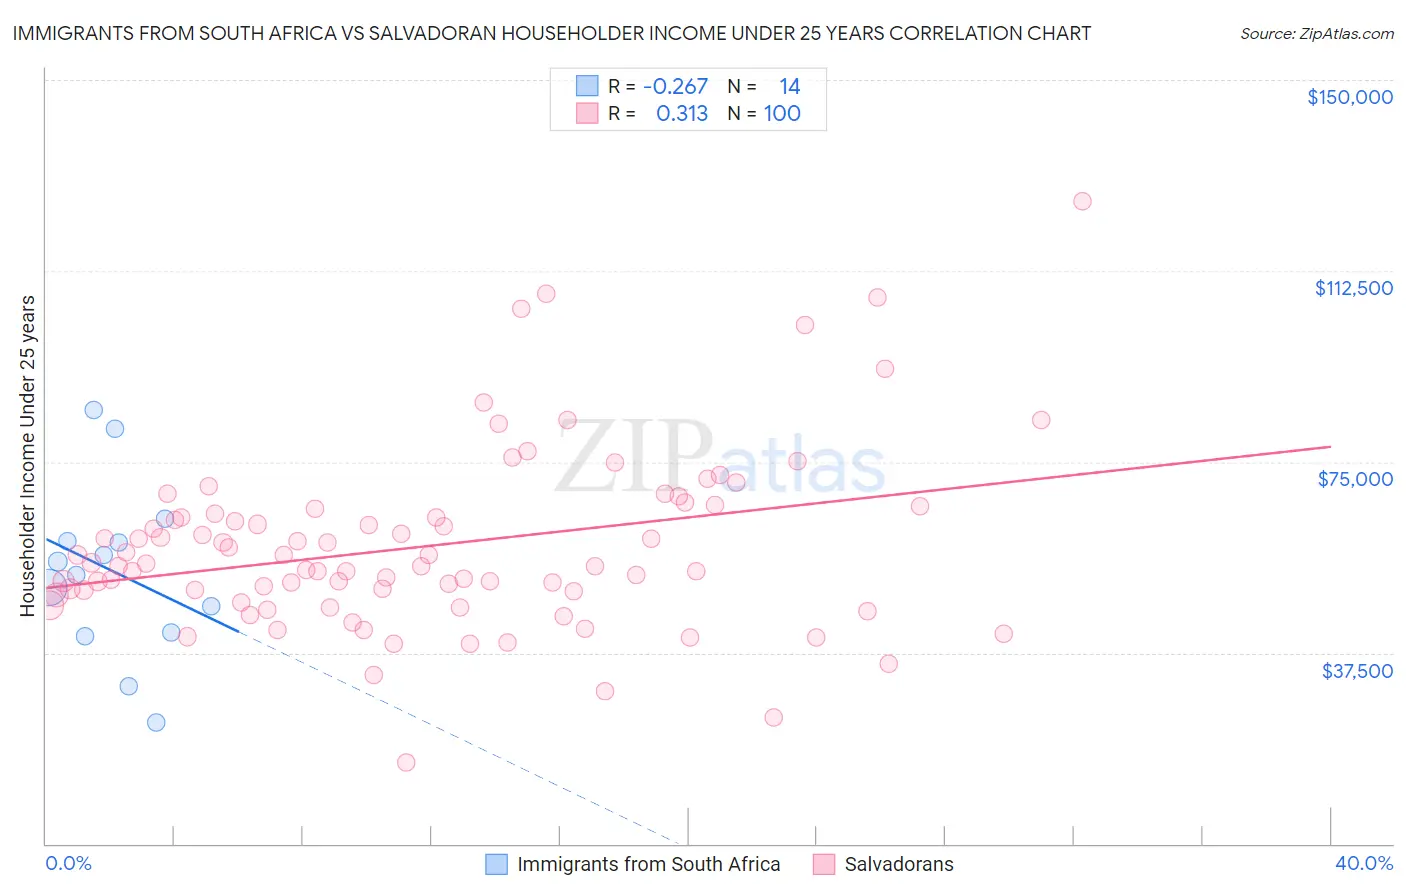 Immigrants from South Africa vs Salvadoran Householder Income Under 25 years